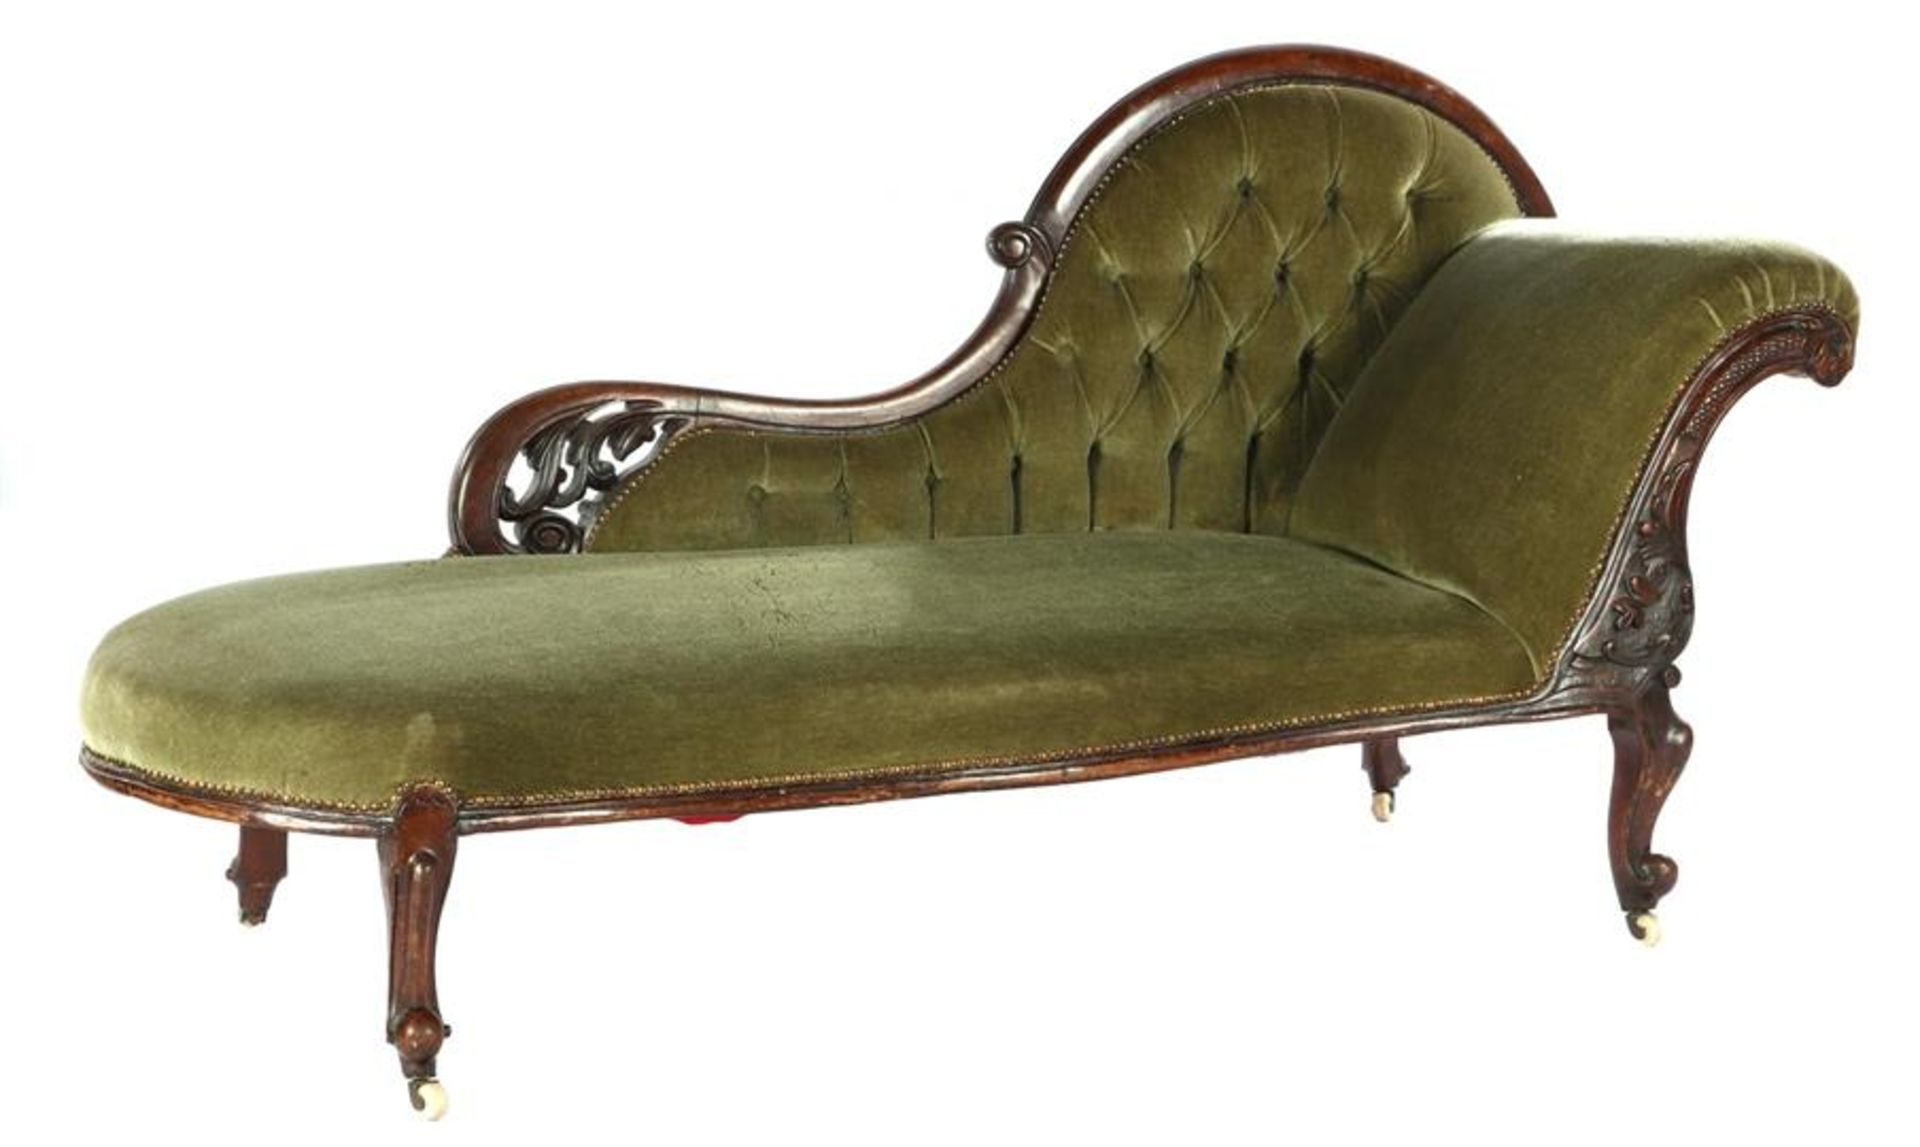 Biedermeier chaise longue with mahogany frame and green upholstery, approx. 175 cm wide